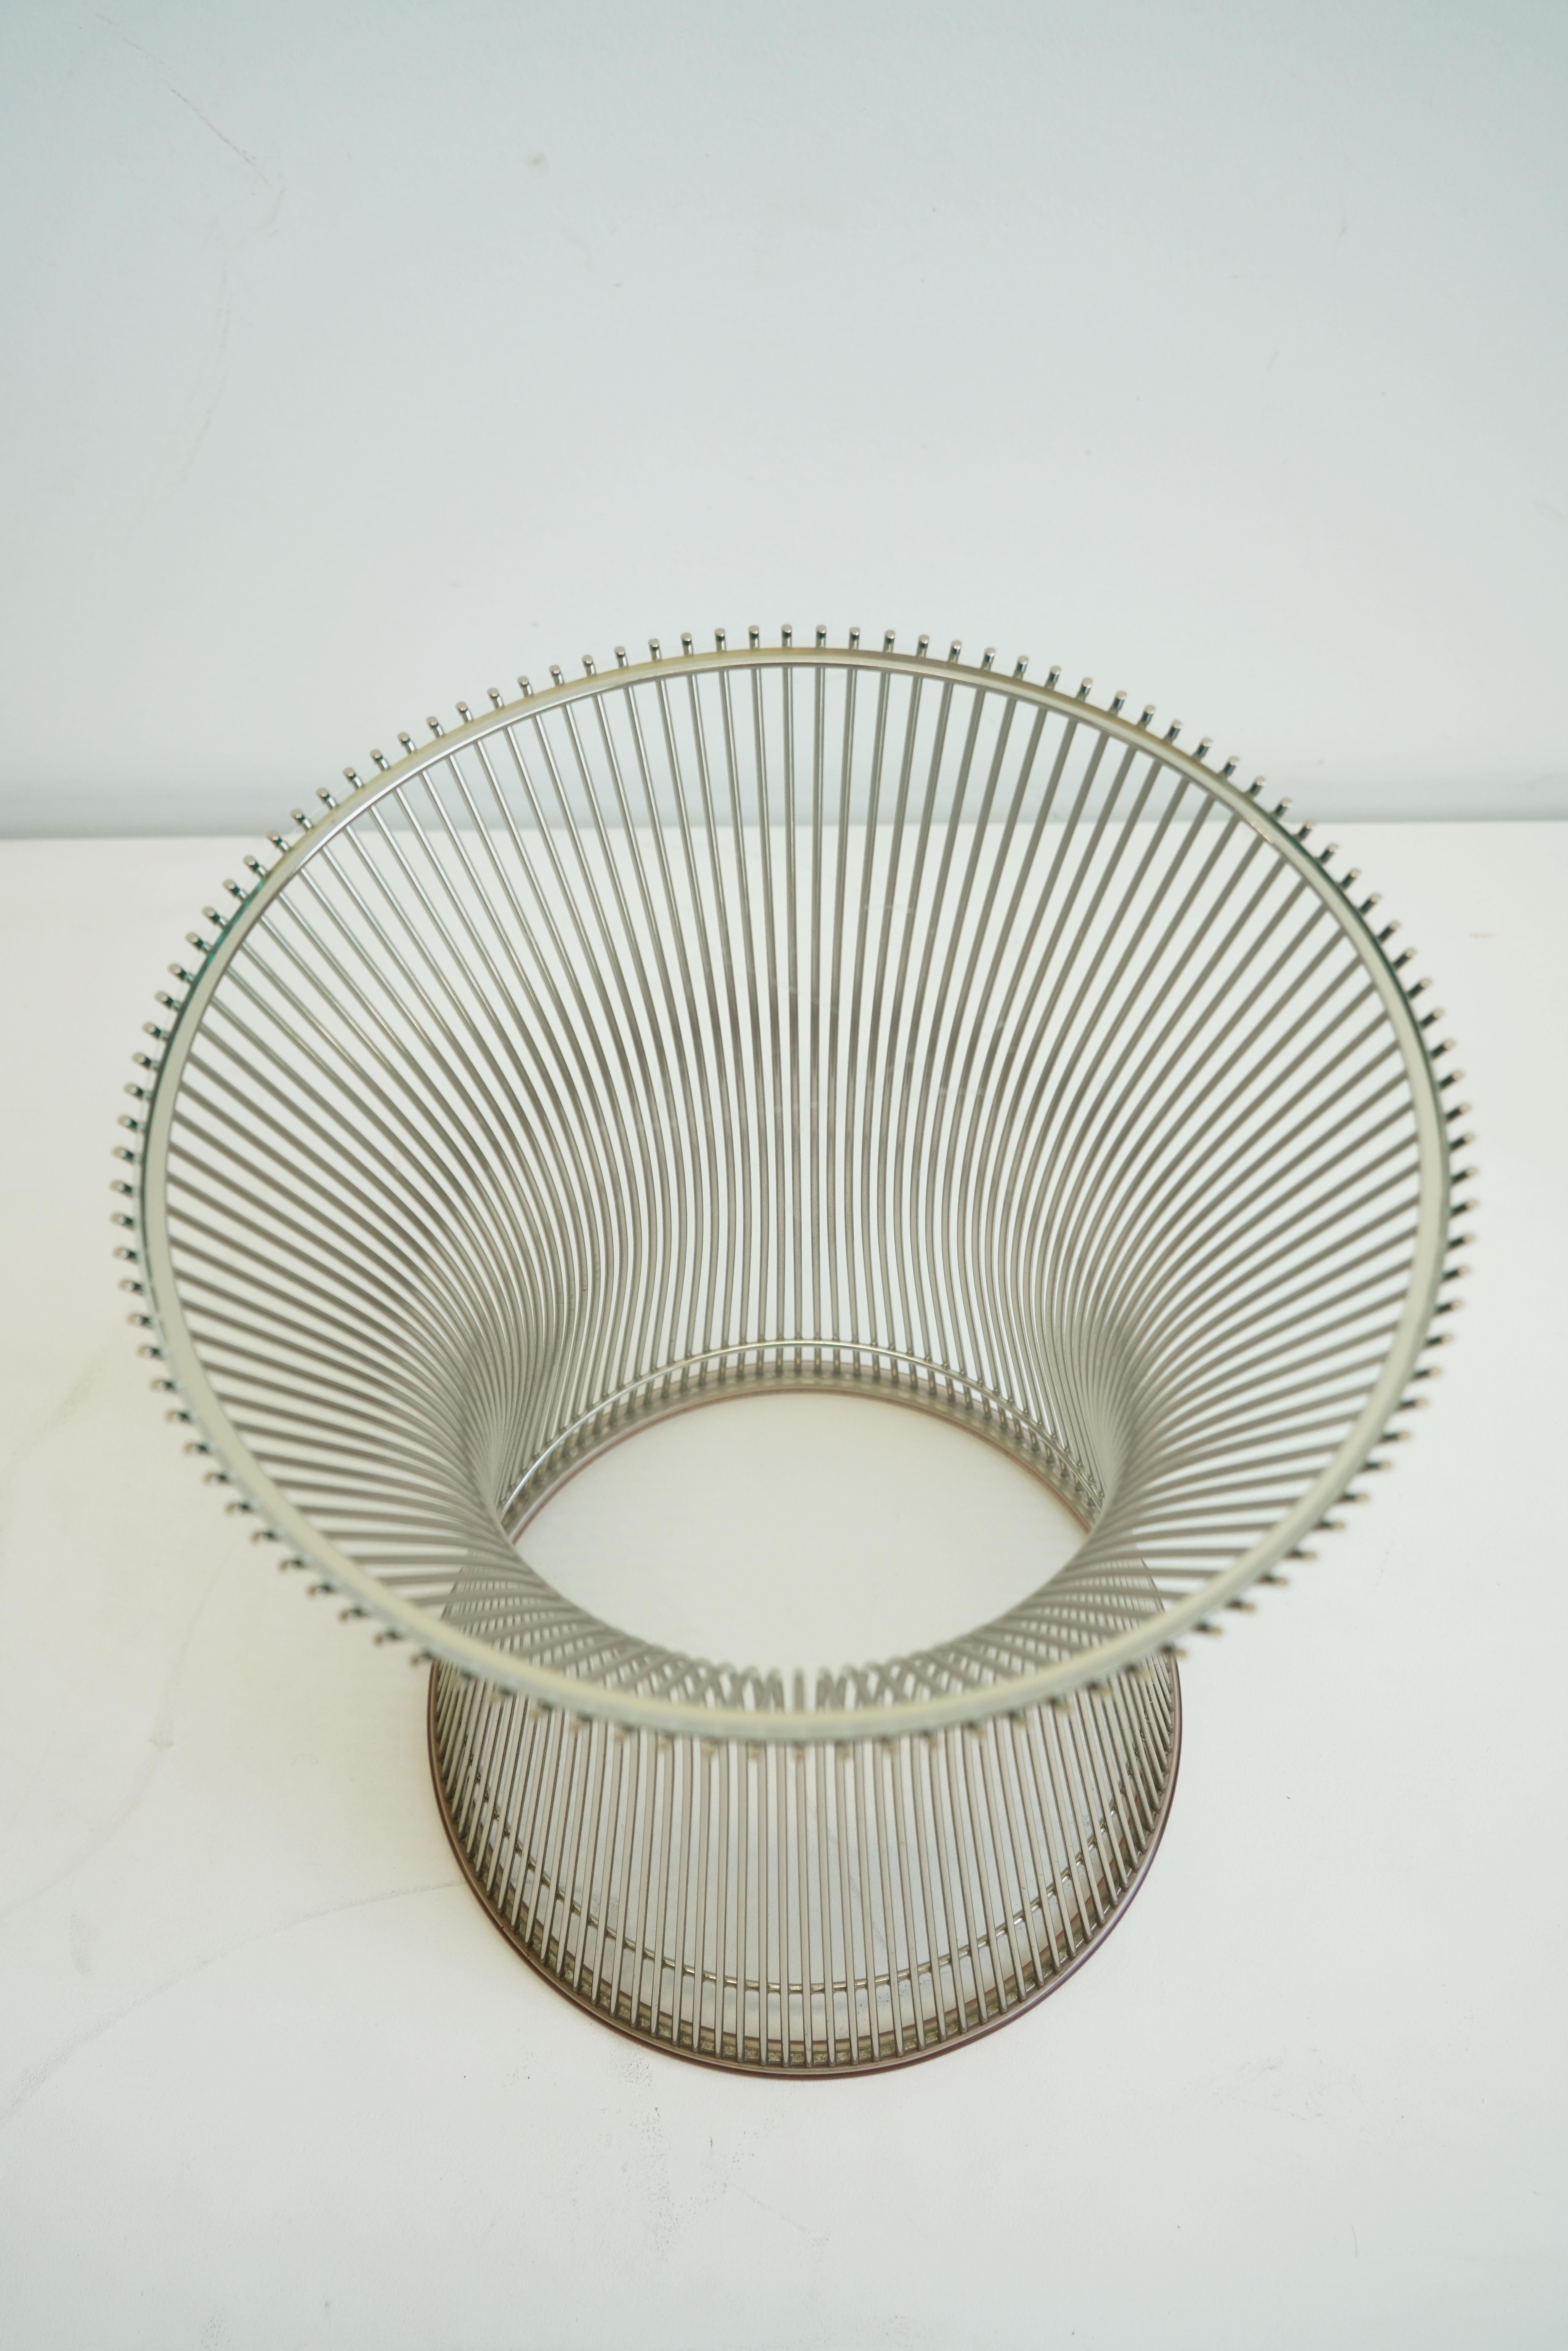 Bronze Warren Platner Side Table for Knoll in Nickel with Glass Top